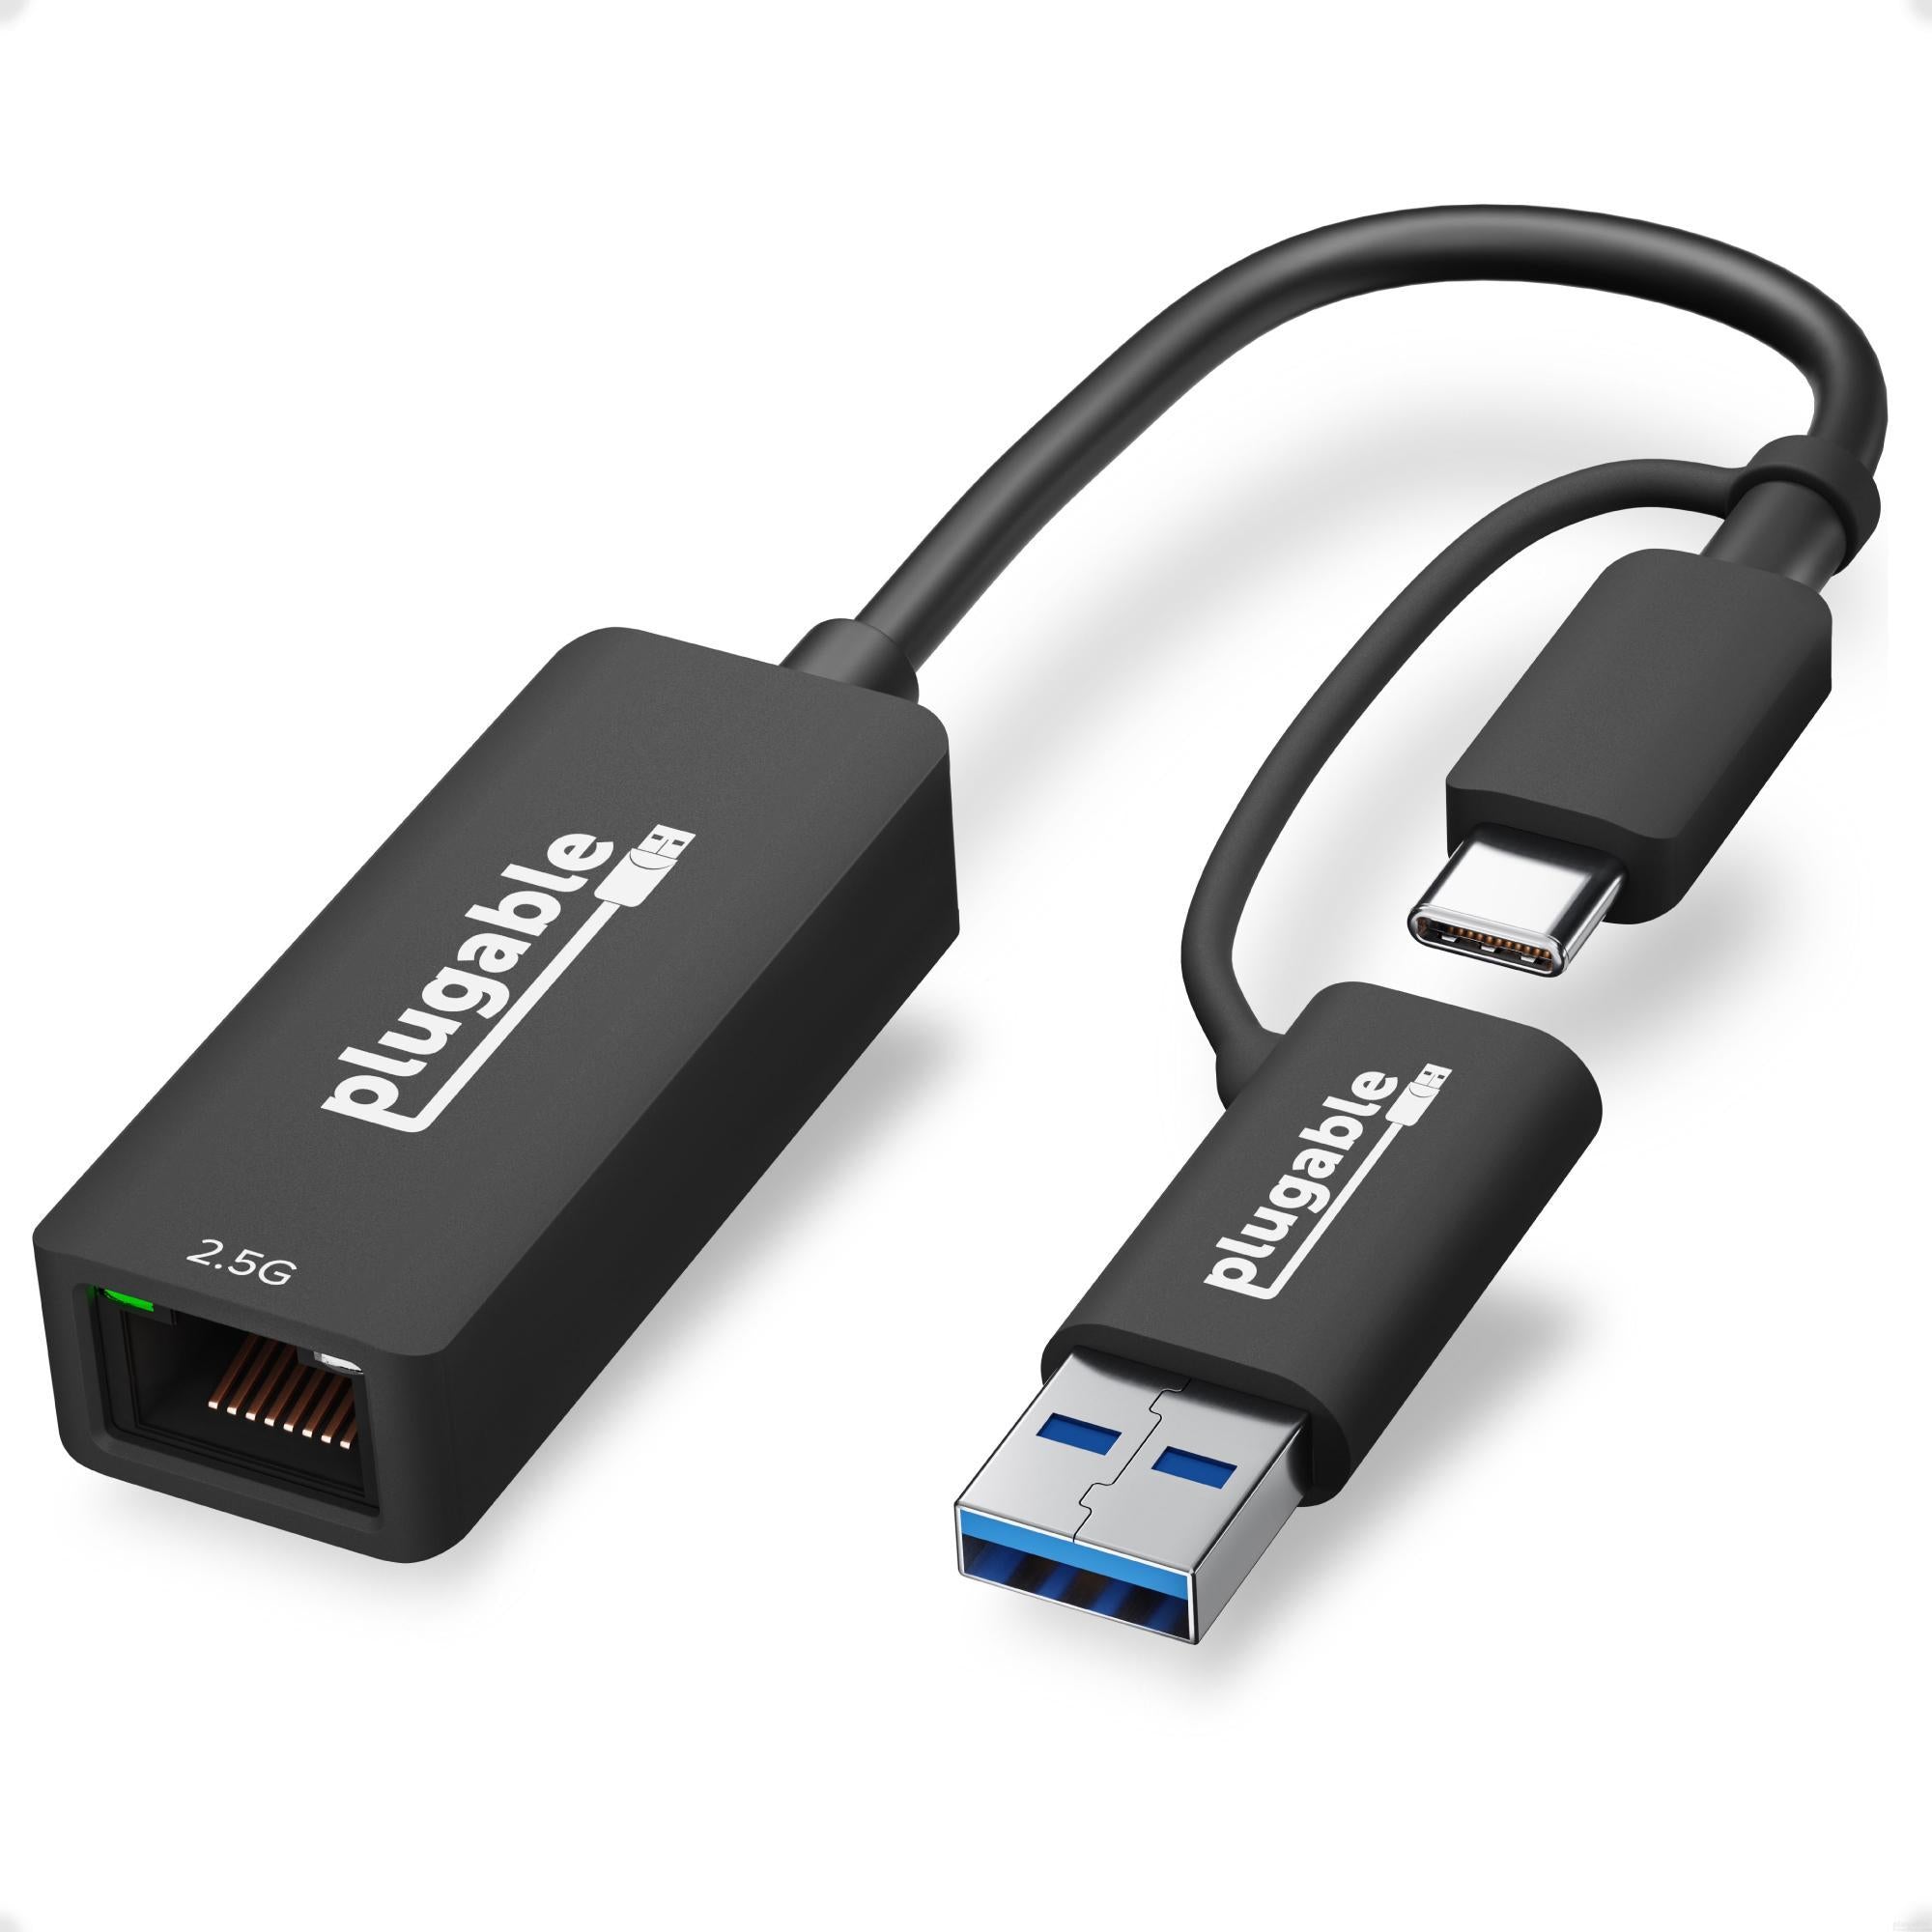 Wired Ethernet Adapter Drivers – Plugable Technologies